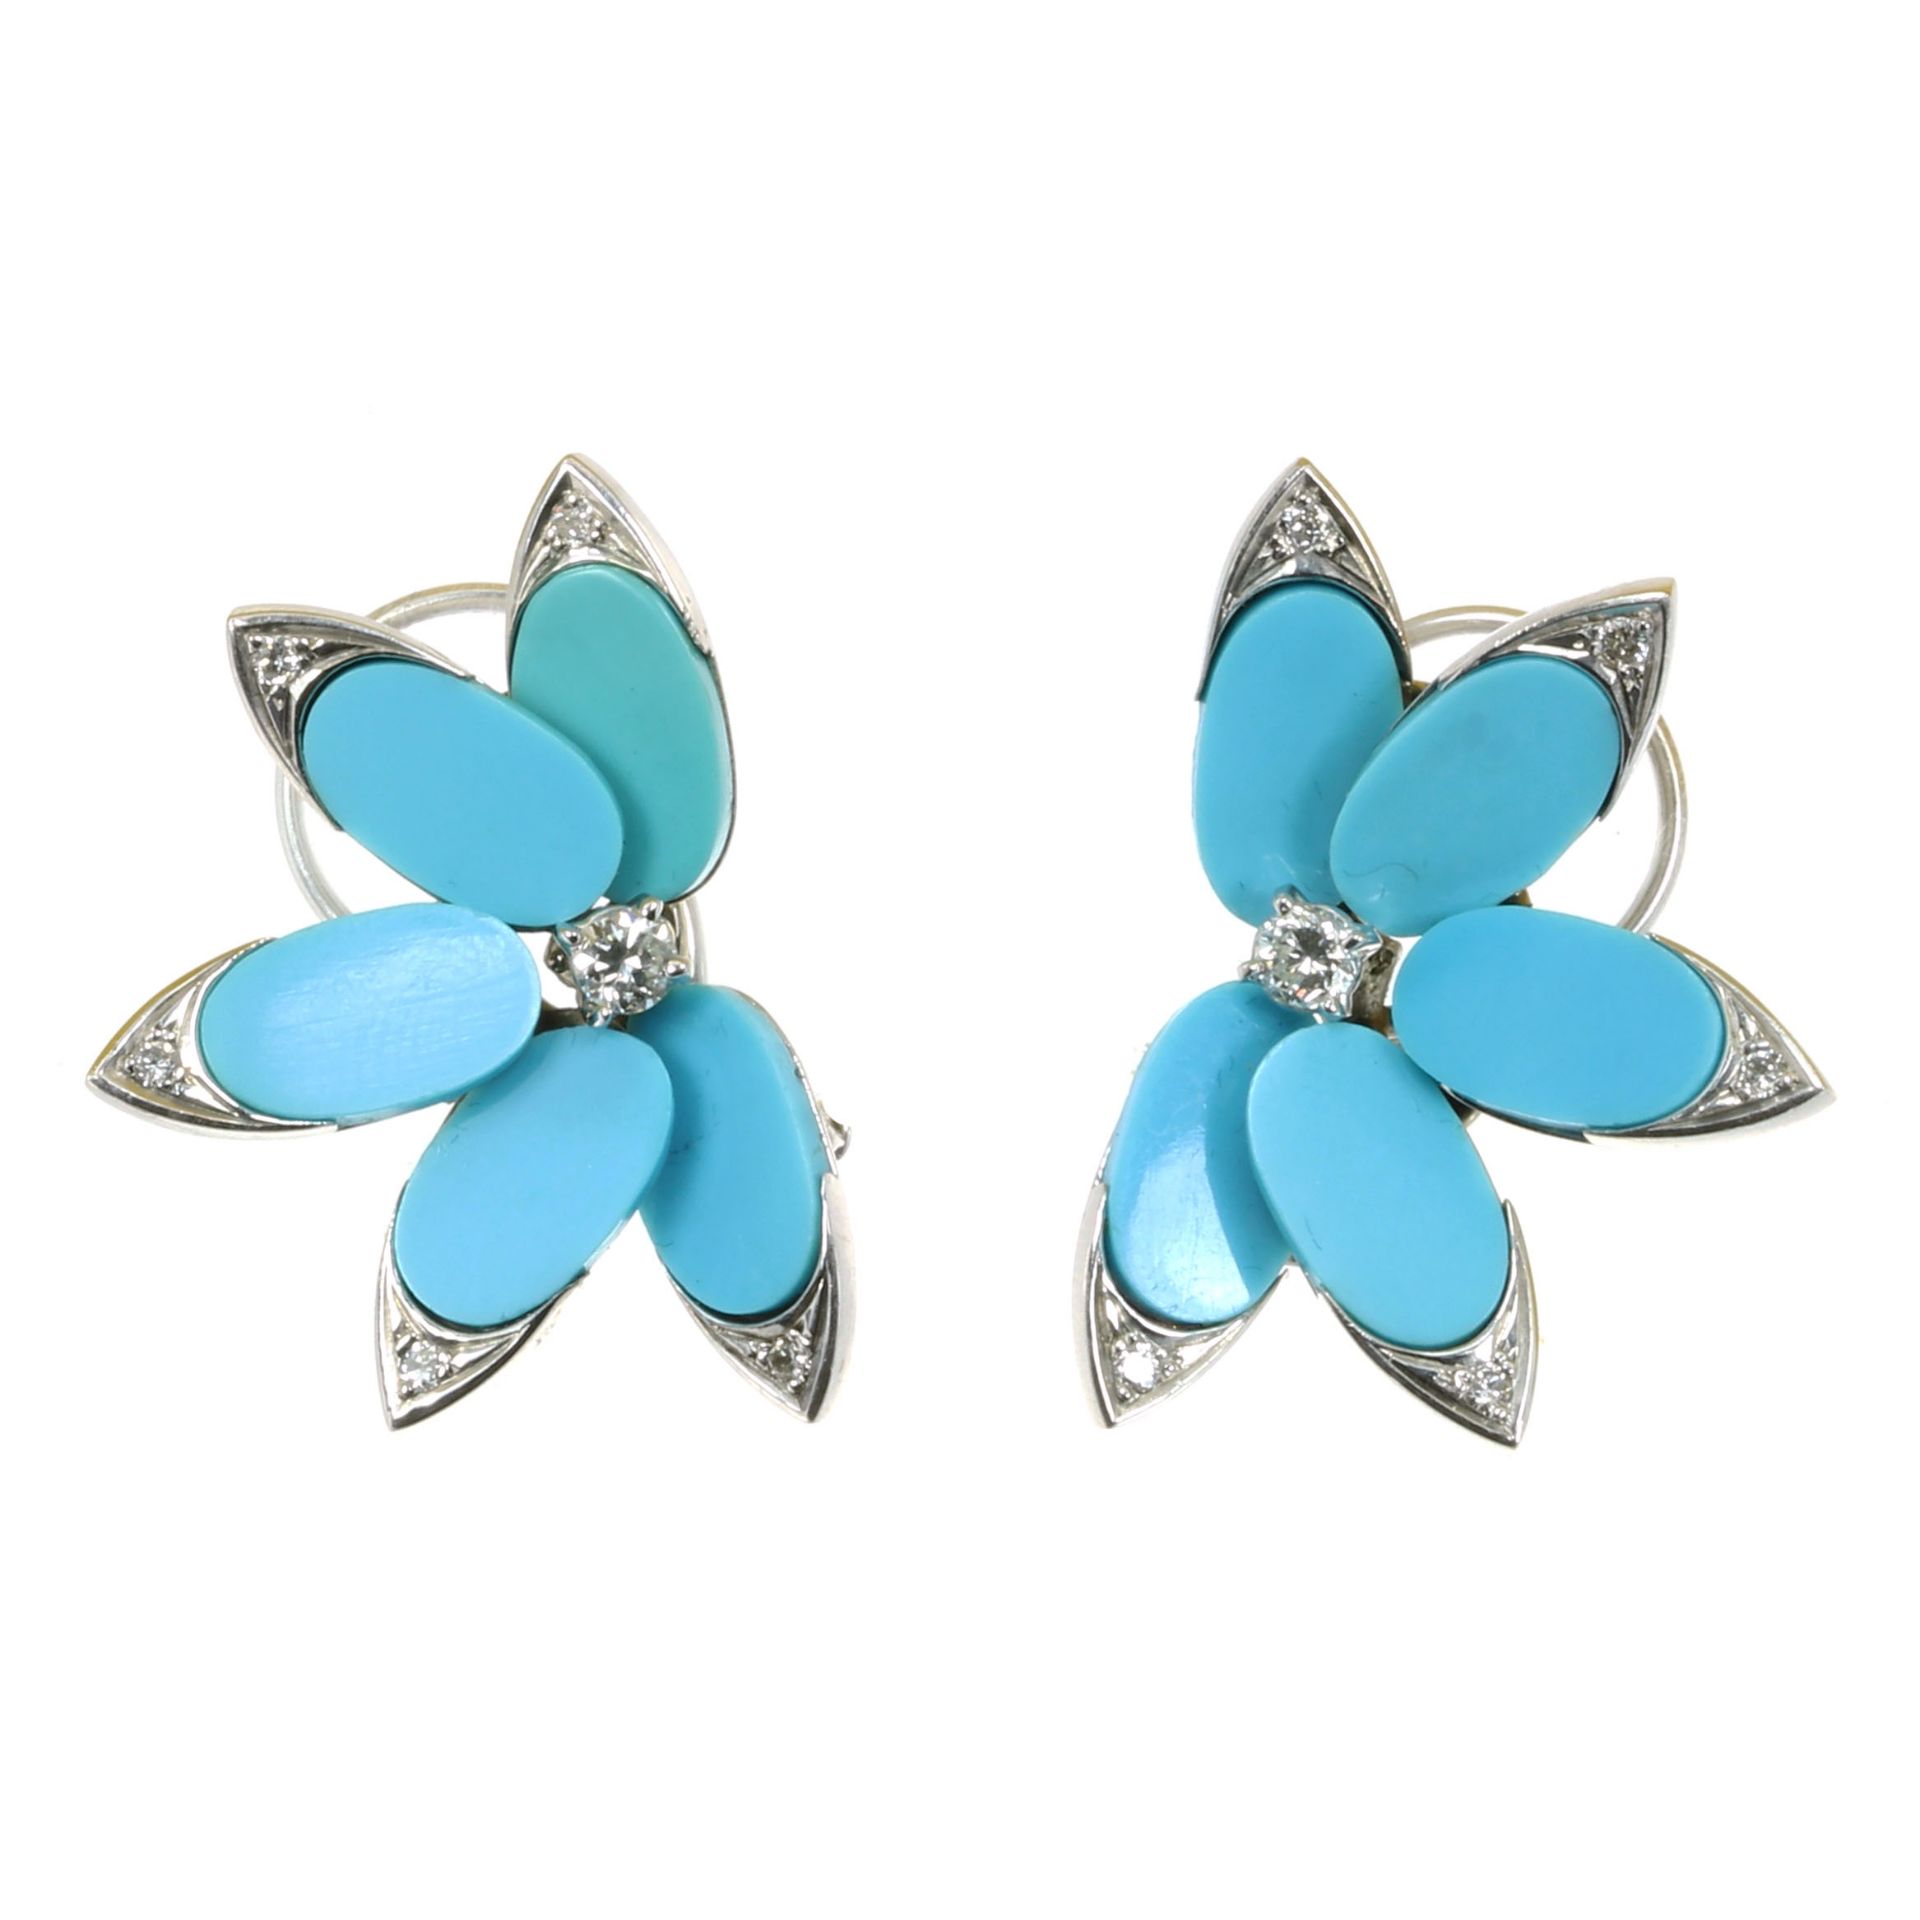 A PAIR OF TURQUOISE AND DIAMOND CLIP EARRINGS in white gold, each designed as a fan of carved pieces